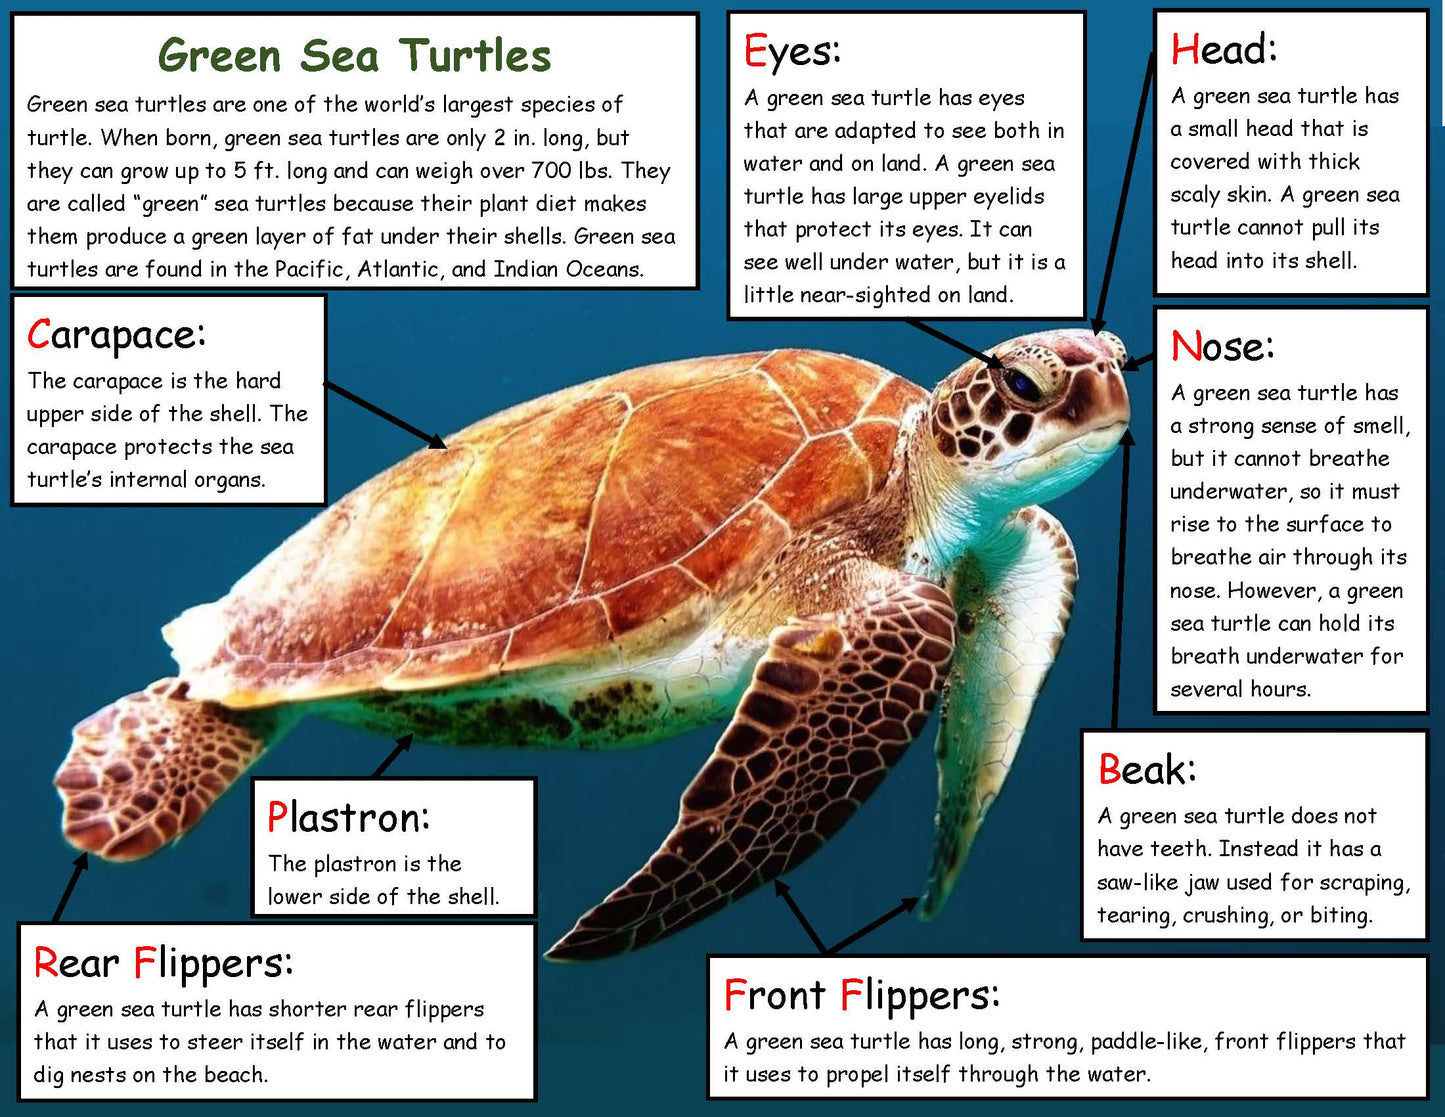 All about green sea turtles